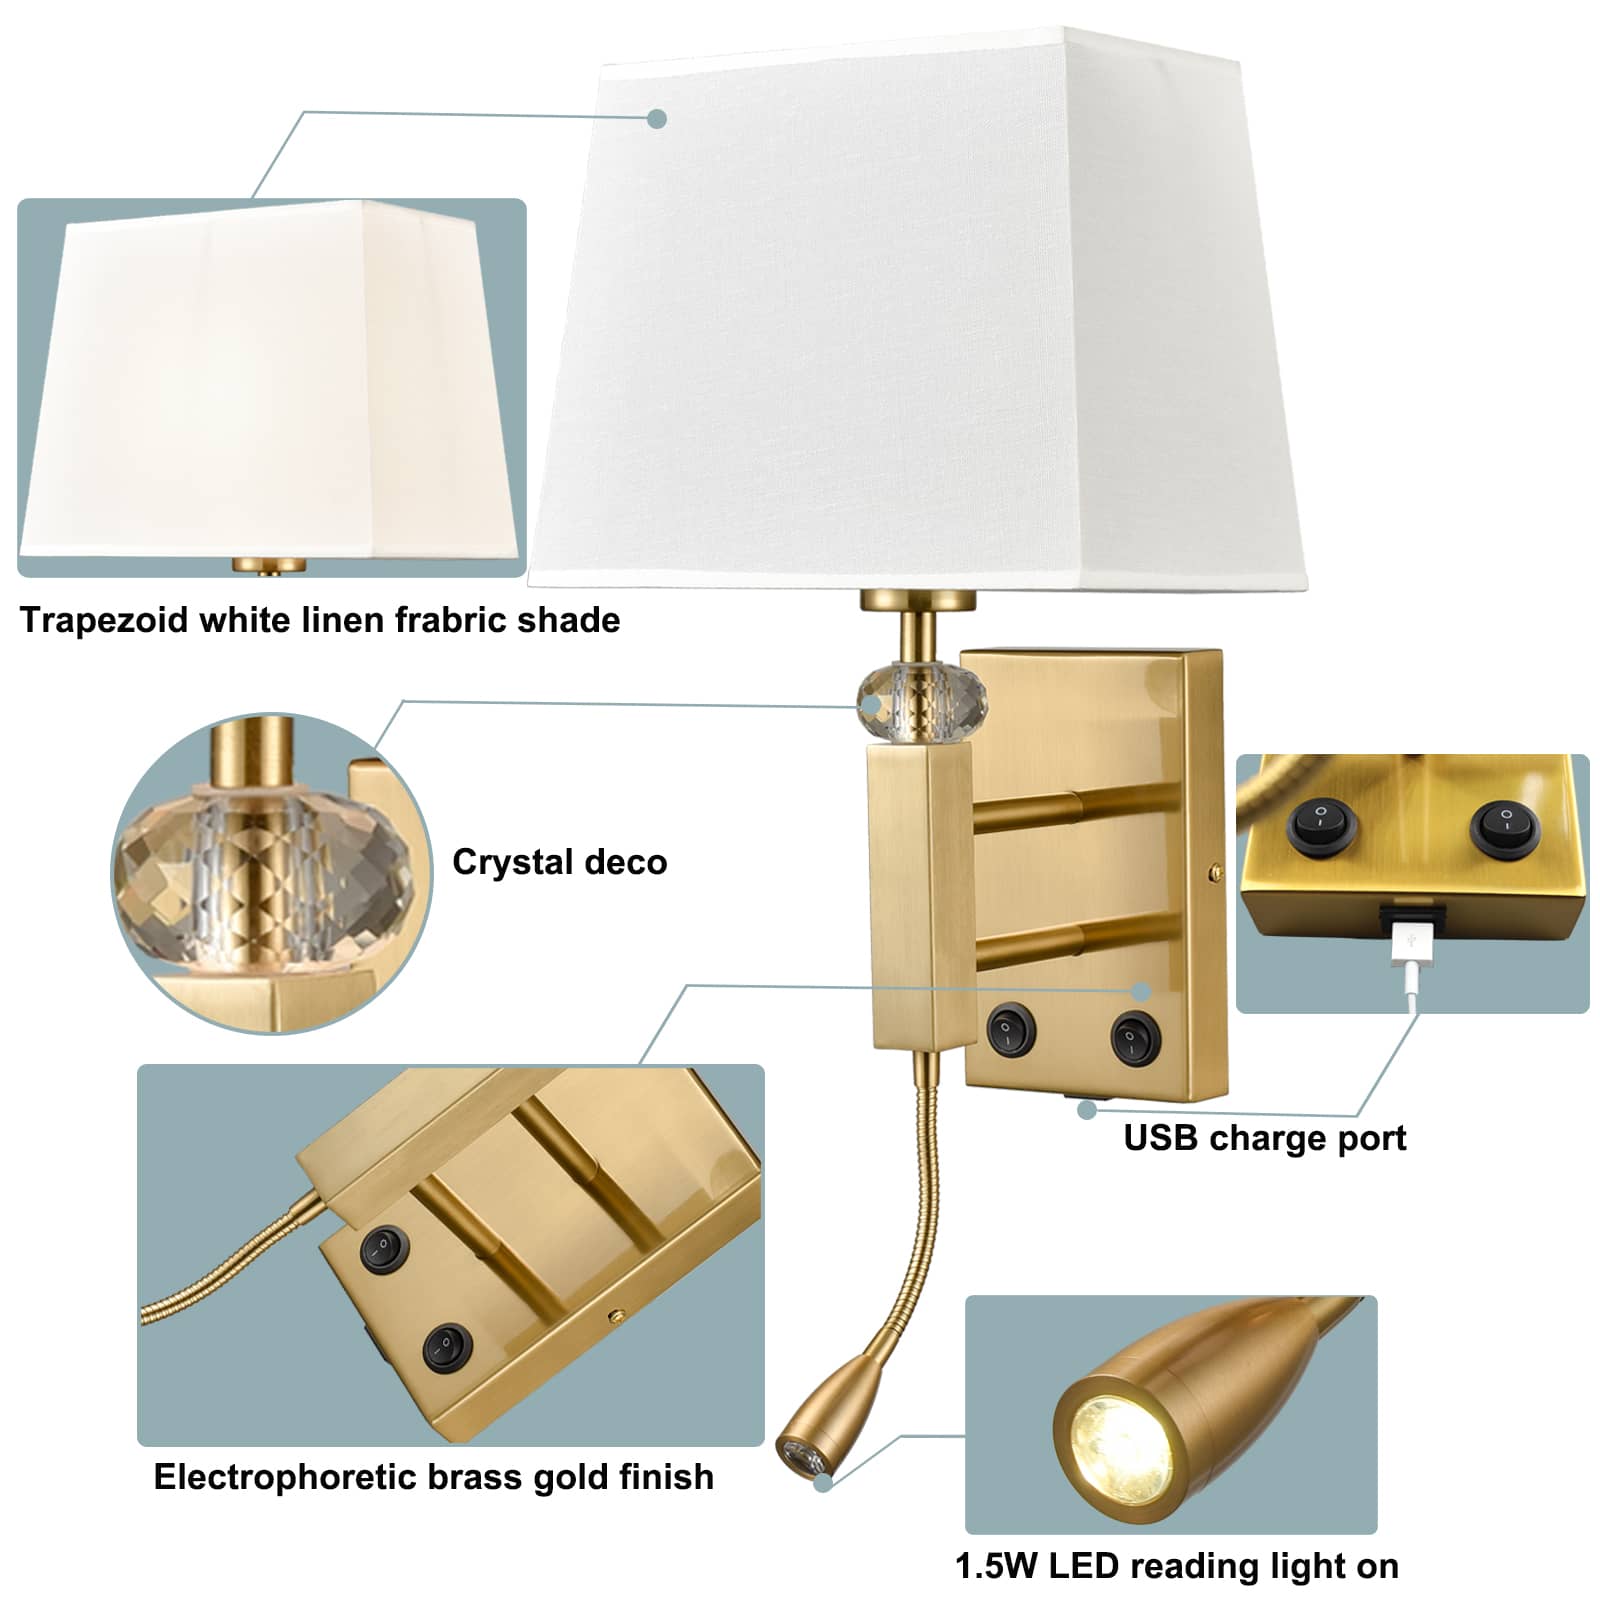 Set of 2 Modern Brass Gold with White Fabric Wall Sconces with USB Charging Port|Twin on/off Switch|LED Reading Light for bedroom